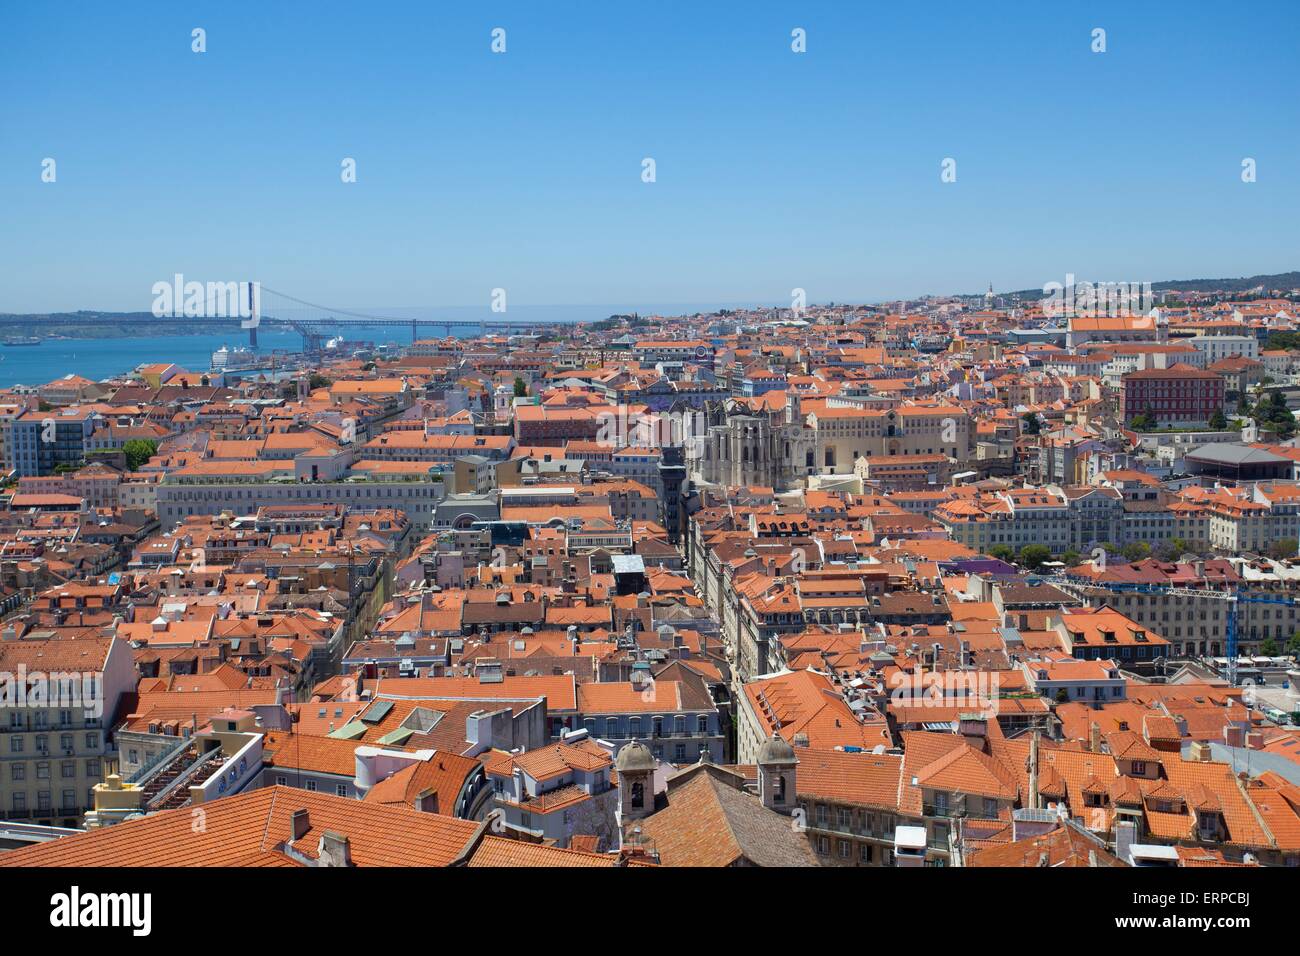 A view over the red rooftops of Lisbon city, the capital city of Portugal from the Castelo de Sao Jorge. Stock Photo